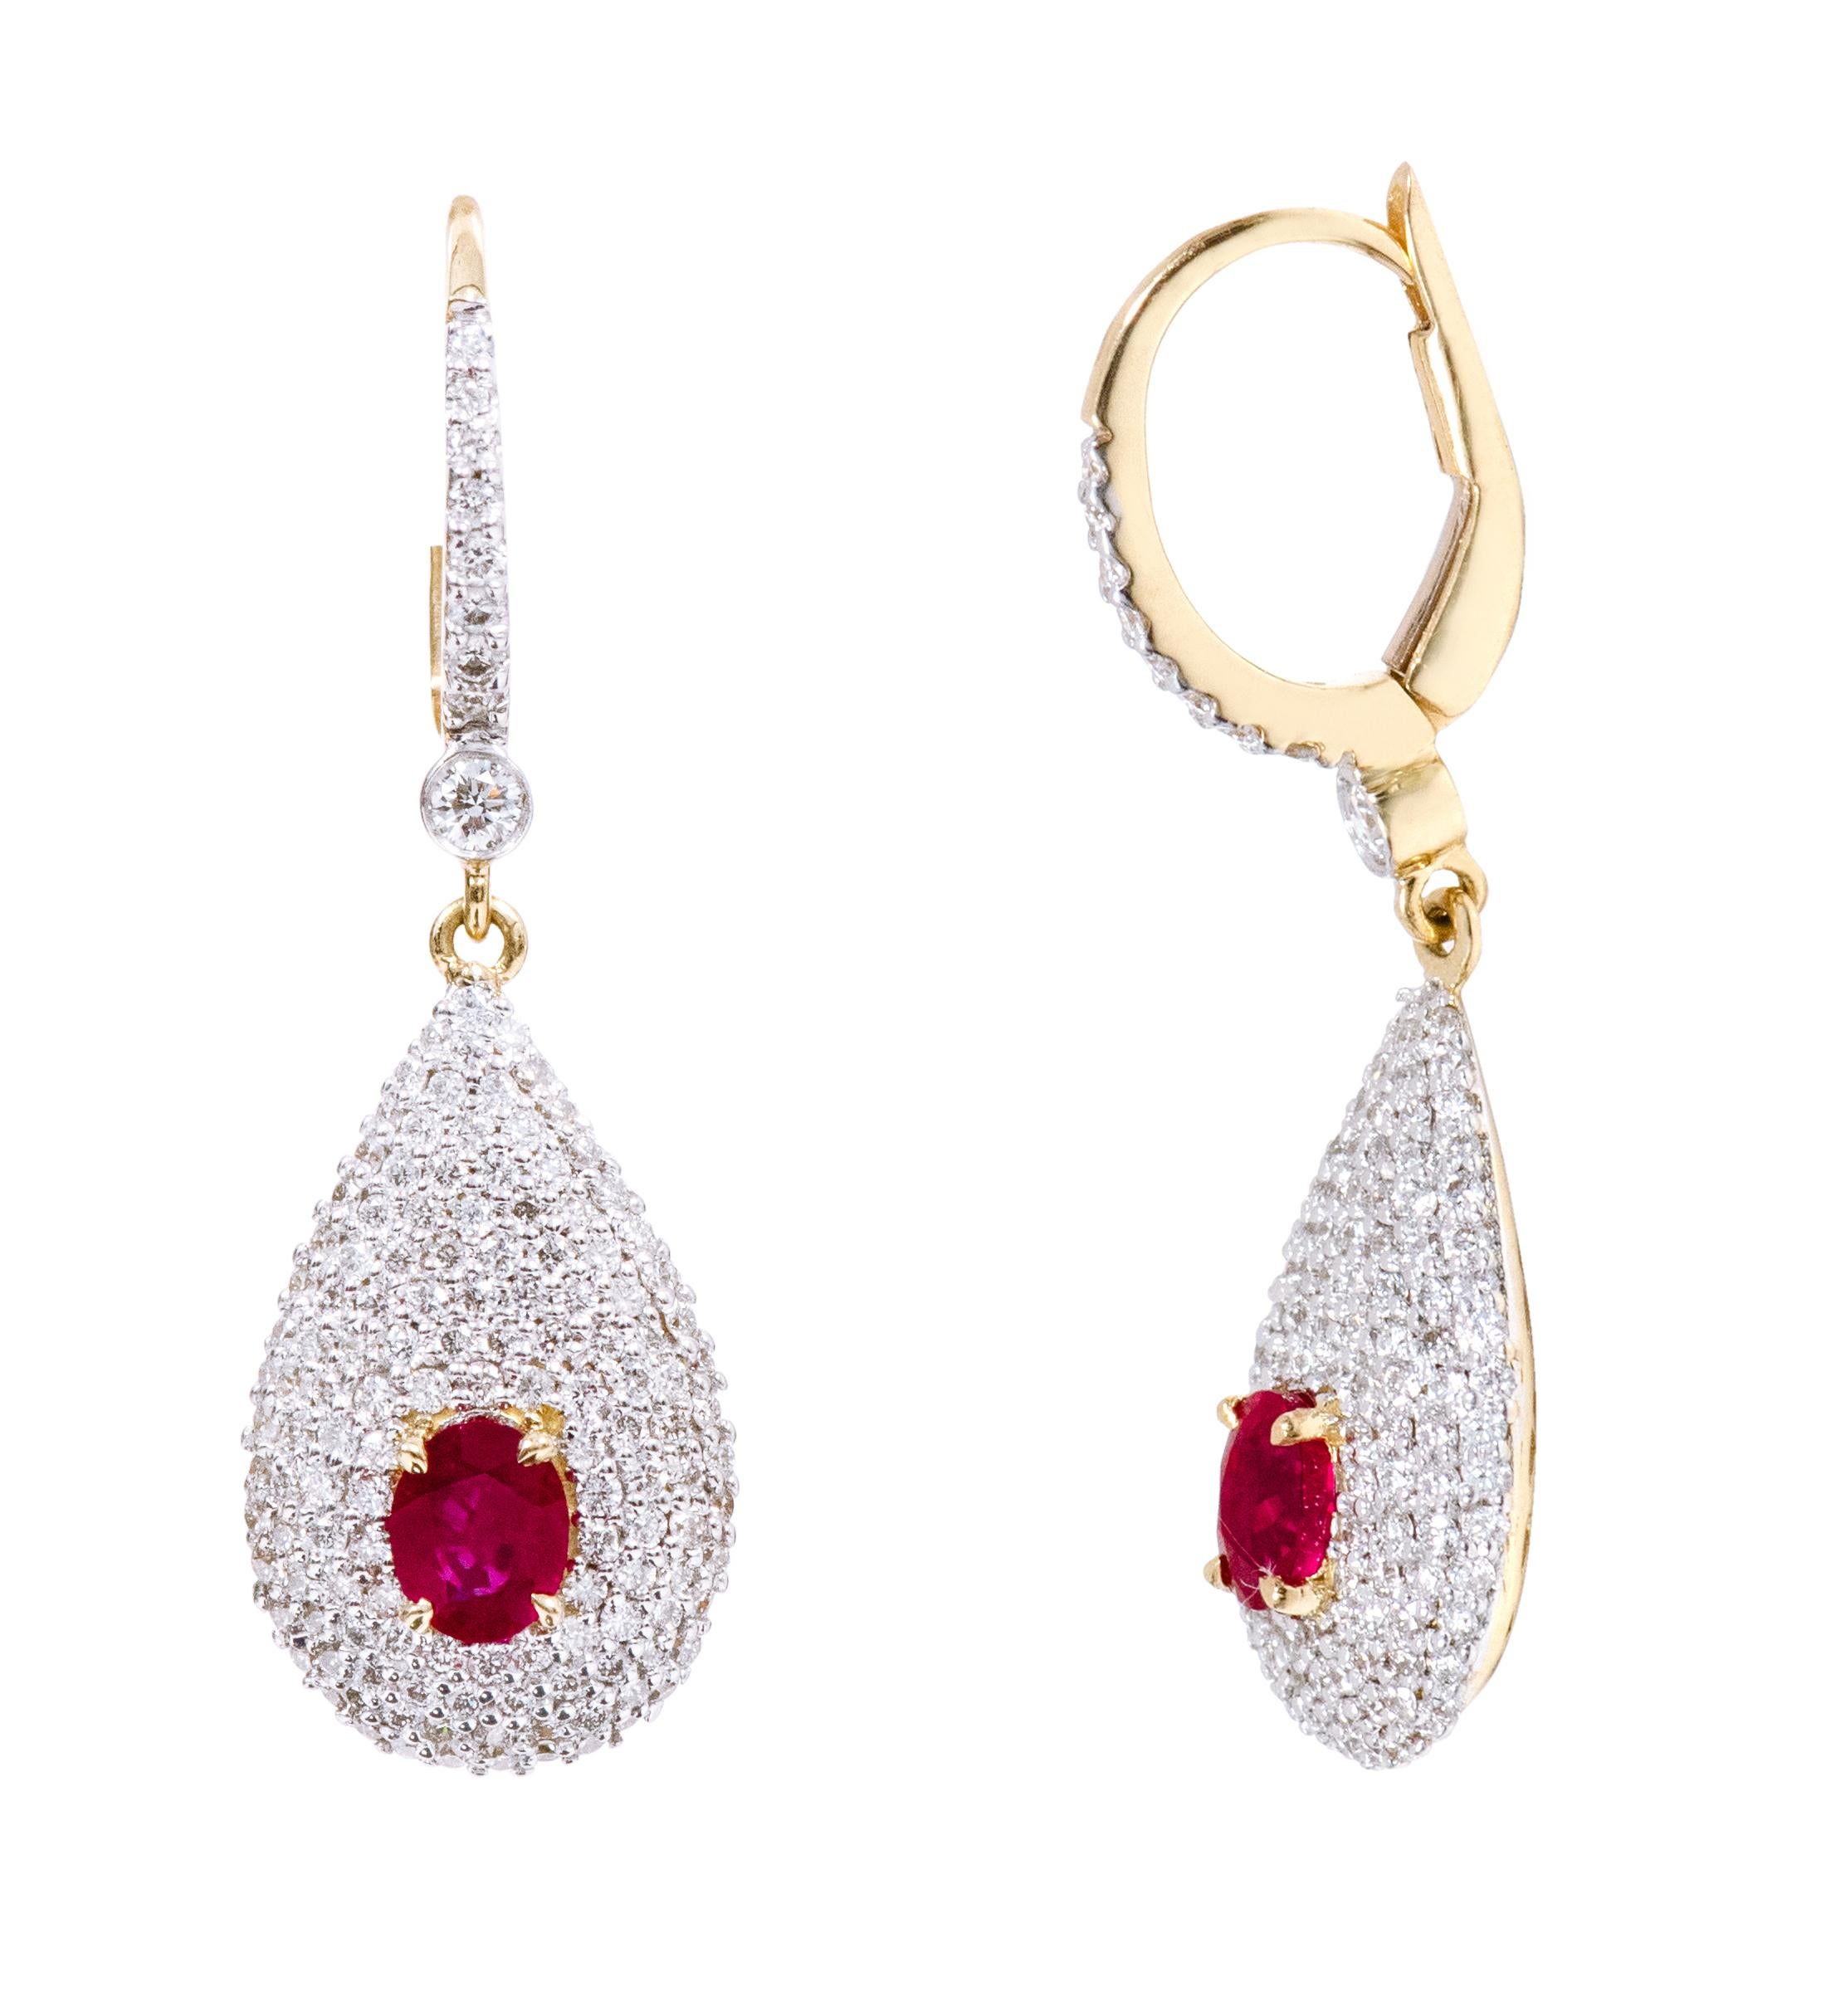 18 Karat Yellow Gold Diamond and Ruby Drop Earrings

This stunning wine ruby and diamond earring is a transcending stylish pair. The inspiration for the design comes from the open ripe Avocado with the 4 layers of micro pave set diamonds merging